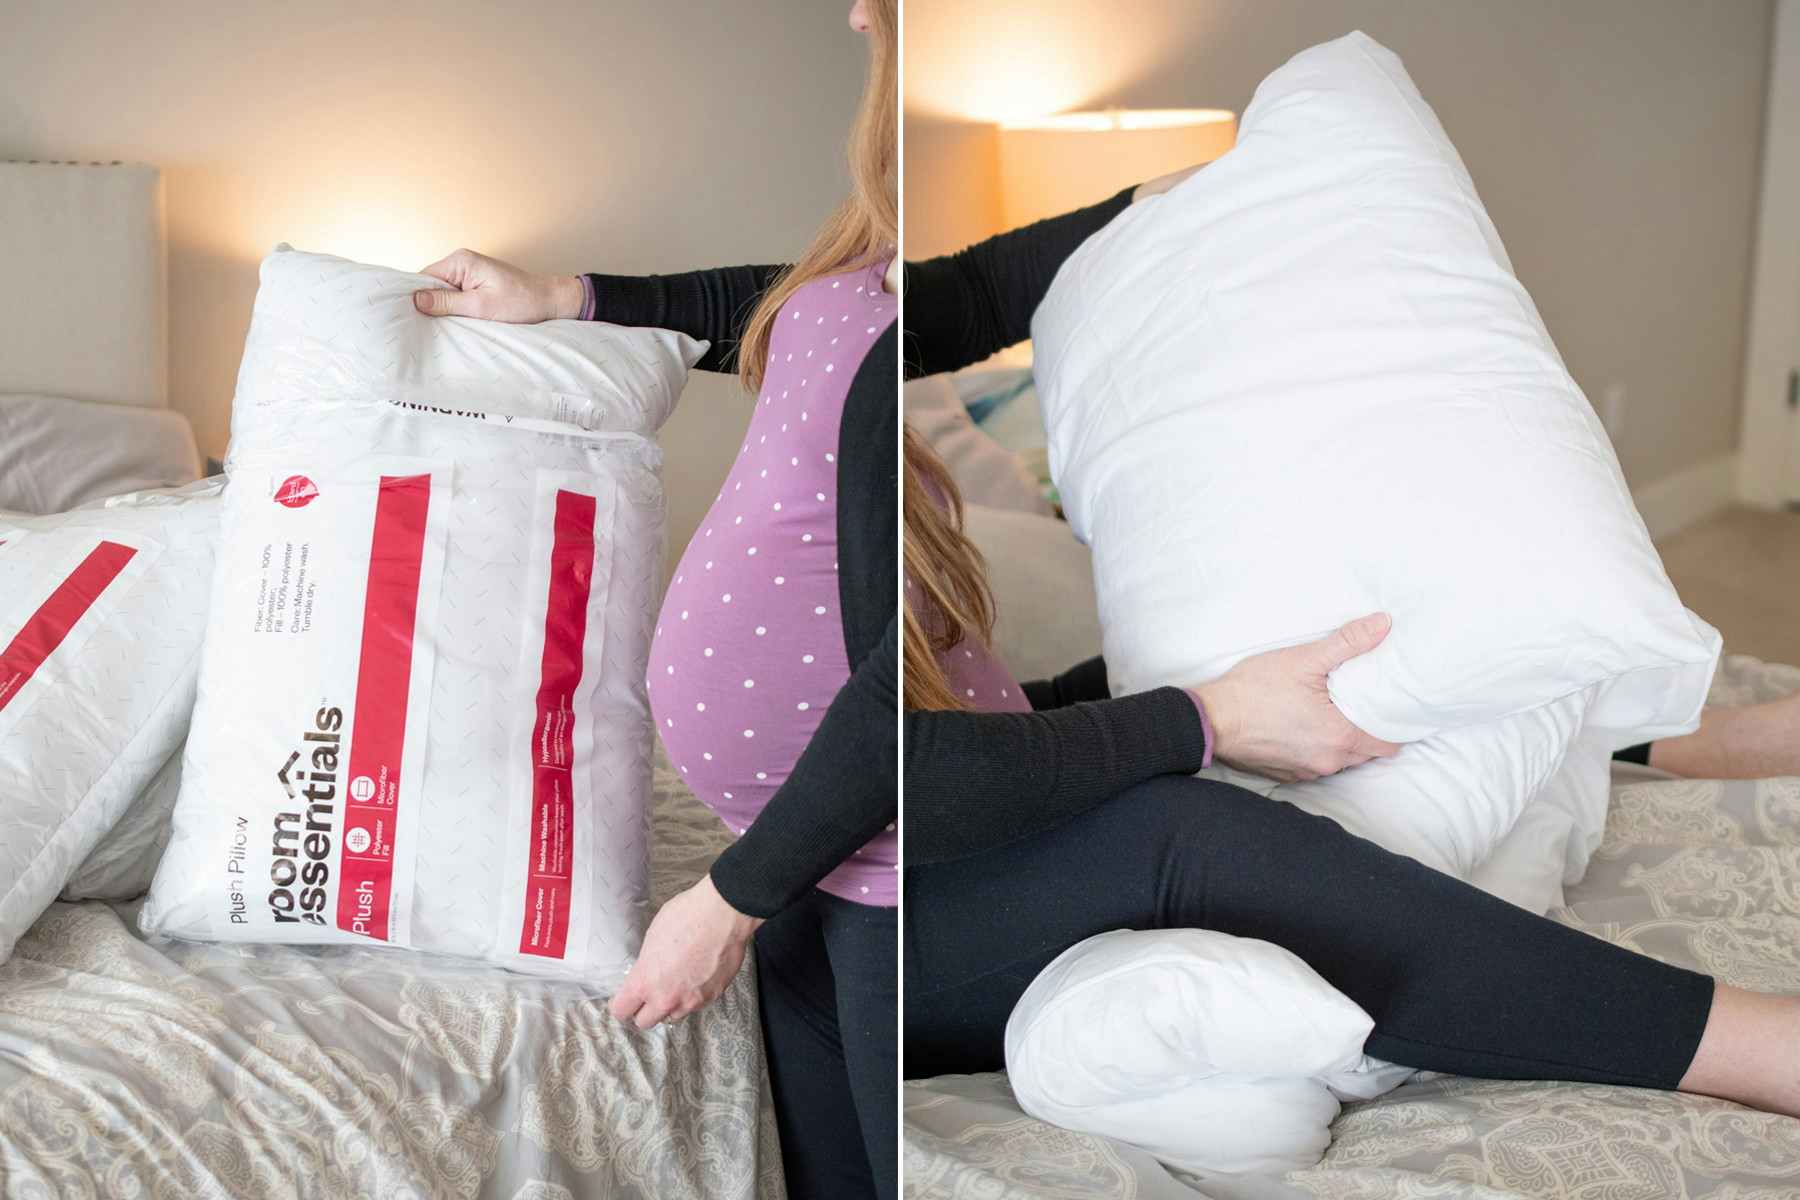 A pregnant woman taking a pillows out of their packaging and putting them beneath her legs.